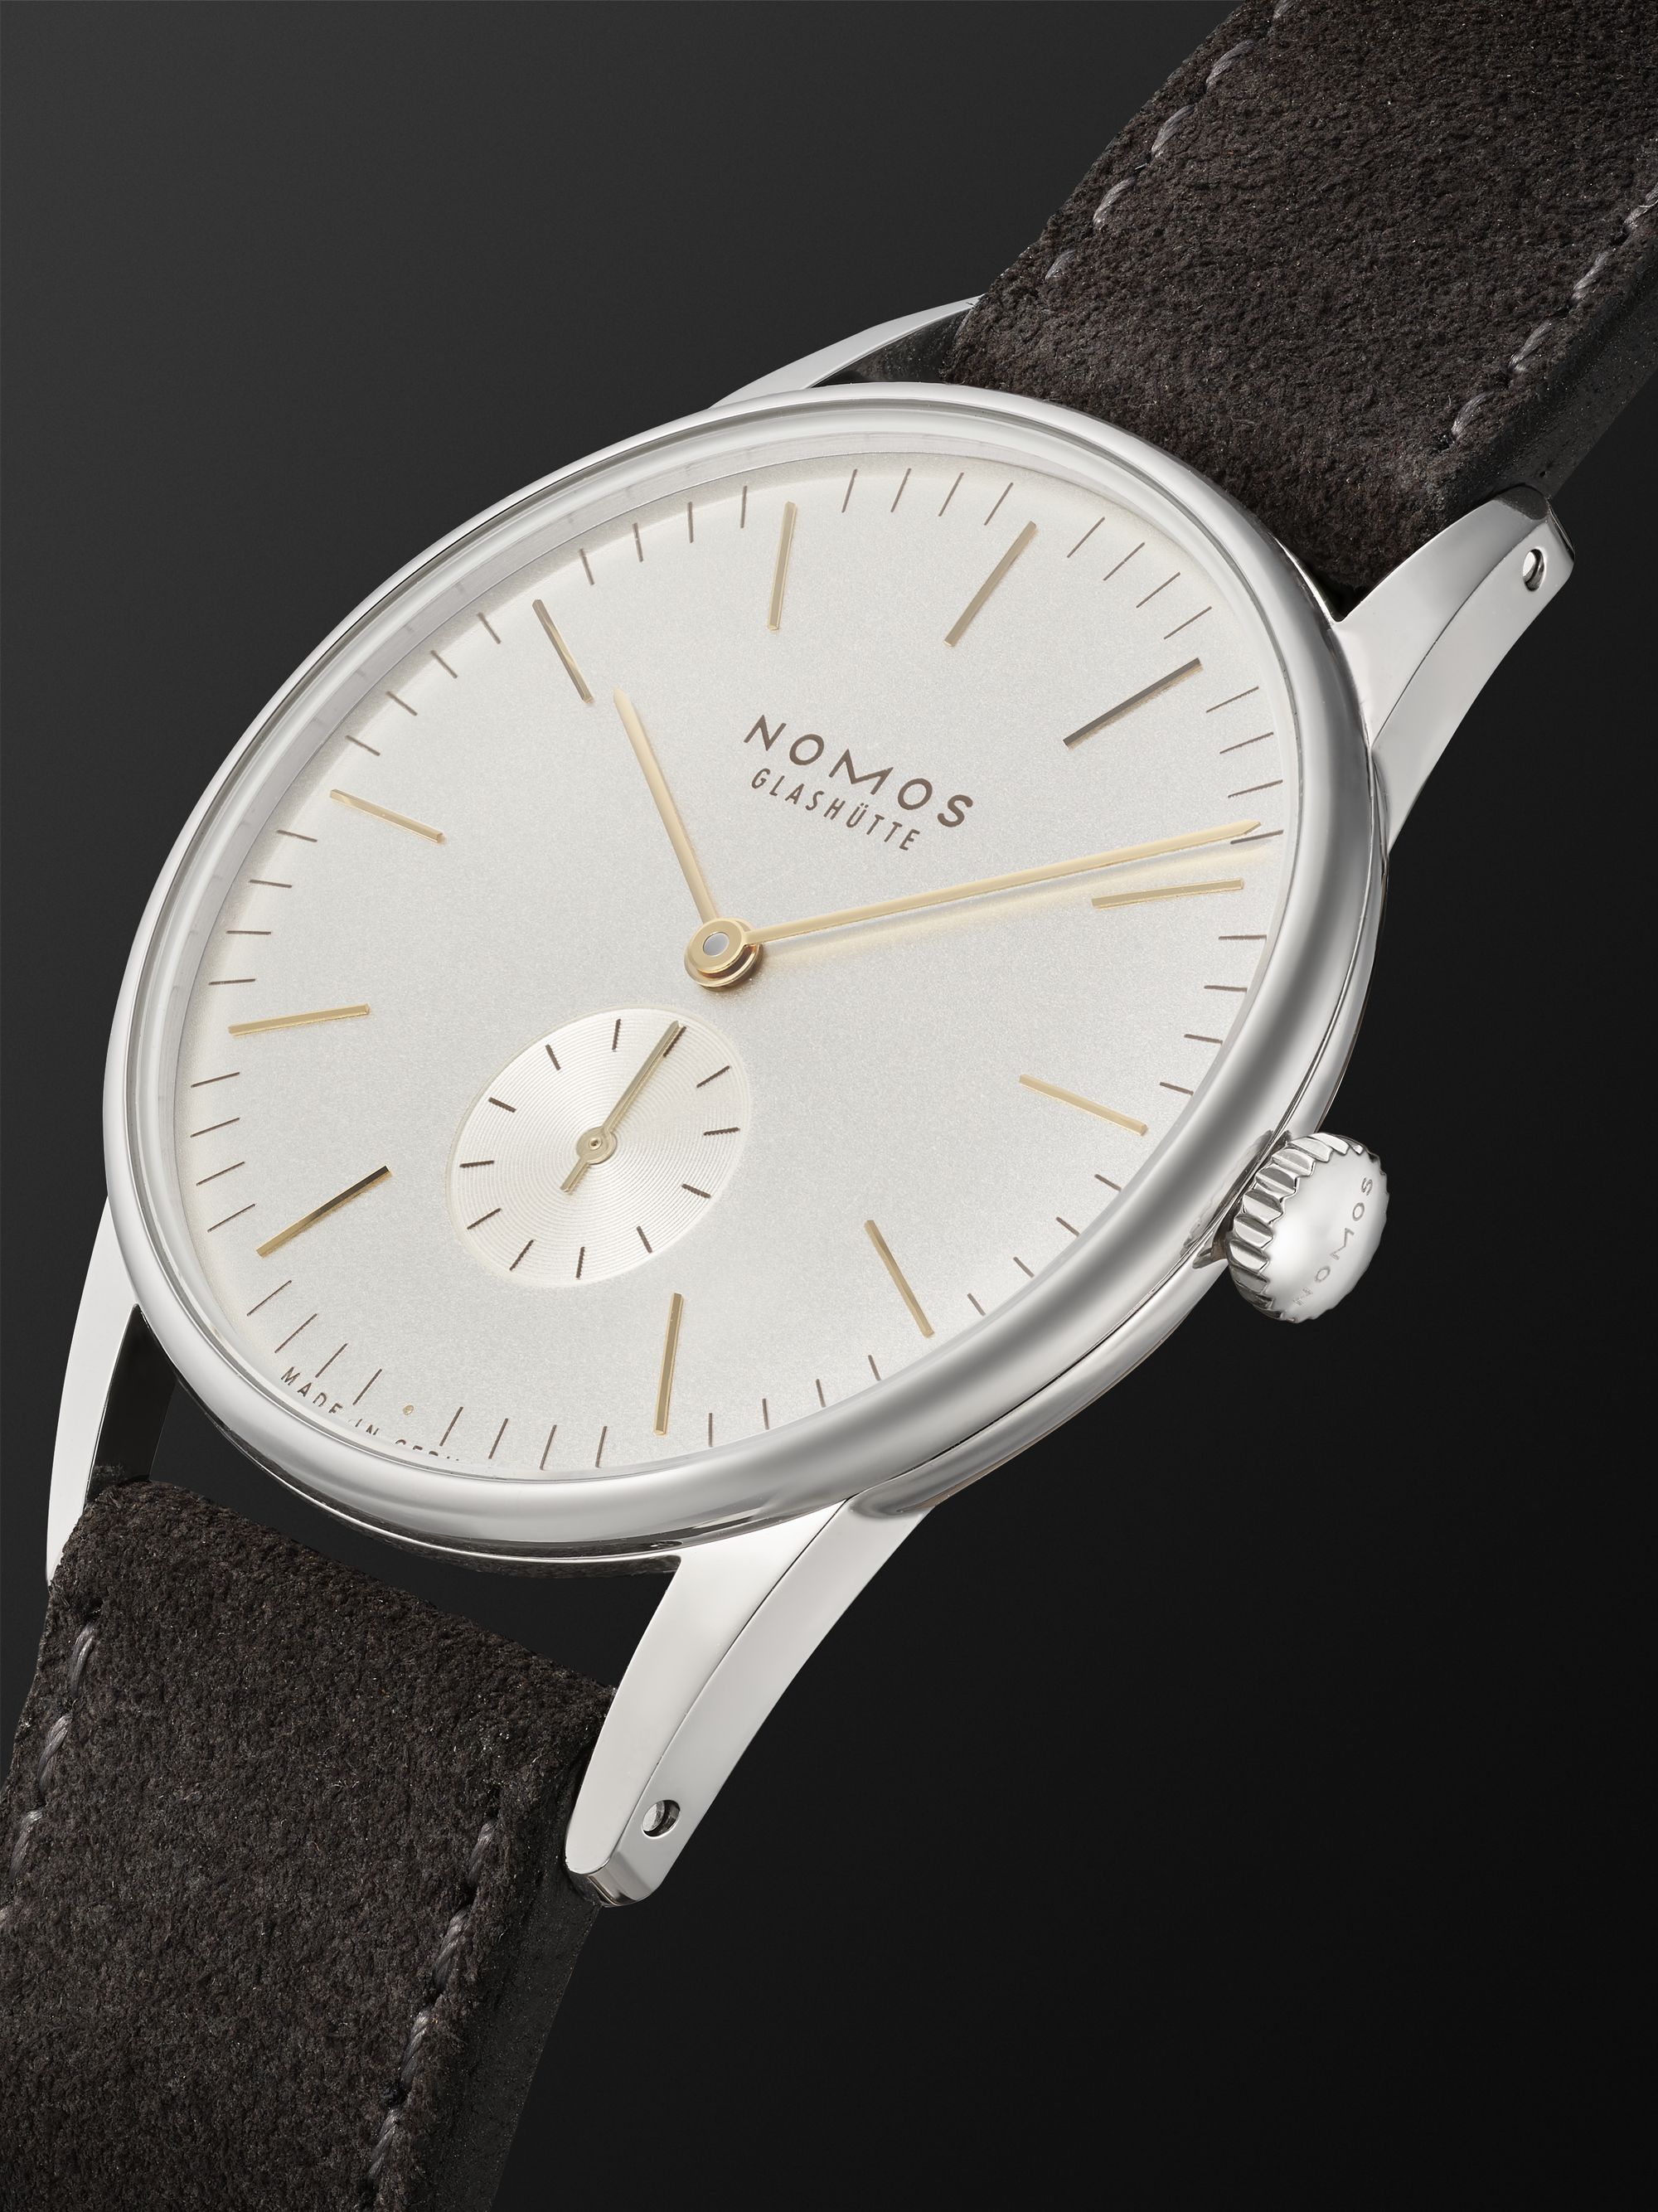 NOMOS GLASHÜTTE Orion Hand-Wound 38mm Stainless Steel and Suede Watch, Ref. No. 379